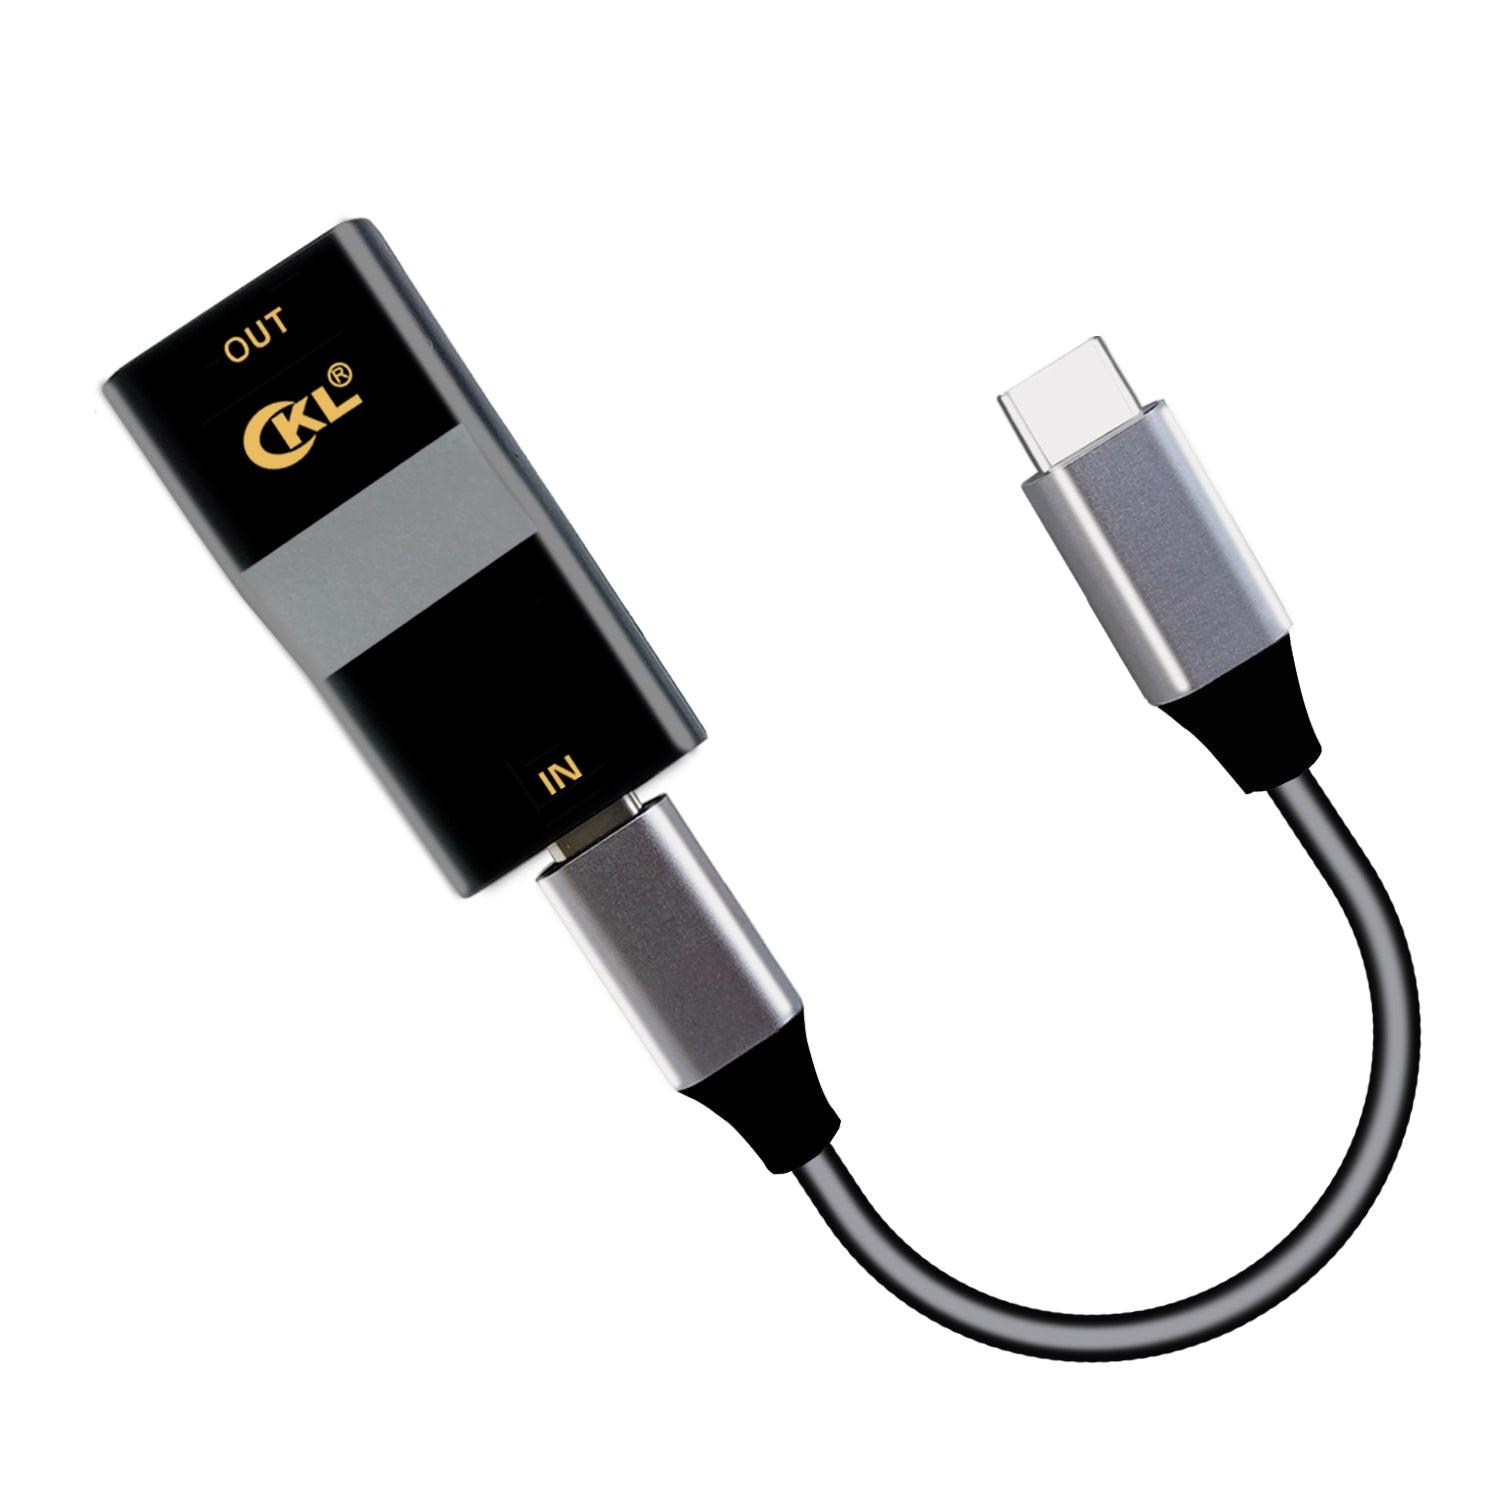 CKL 4Kx2K@60Hz USB C to DisplayPort Adapter, USB-C to DP Converter with Cable Compatible Thunderbolt 3 for CKL KVM Switch, Galaxy, MacBook, Surface Pro, Oculus Rift S, XPS, iPad, Samsung, Dell - CKL KVM Switches